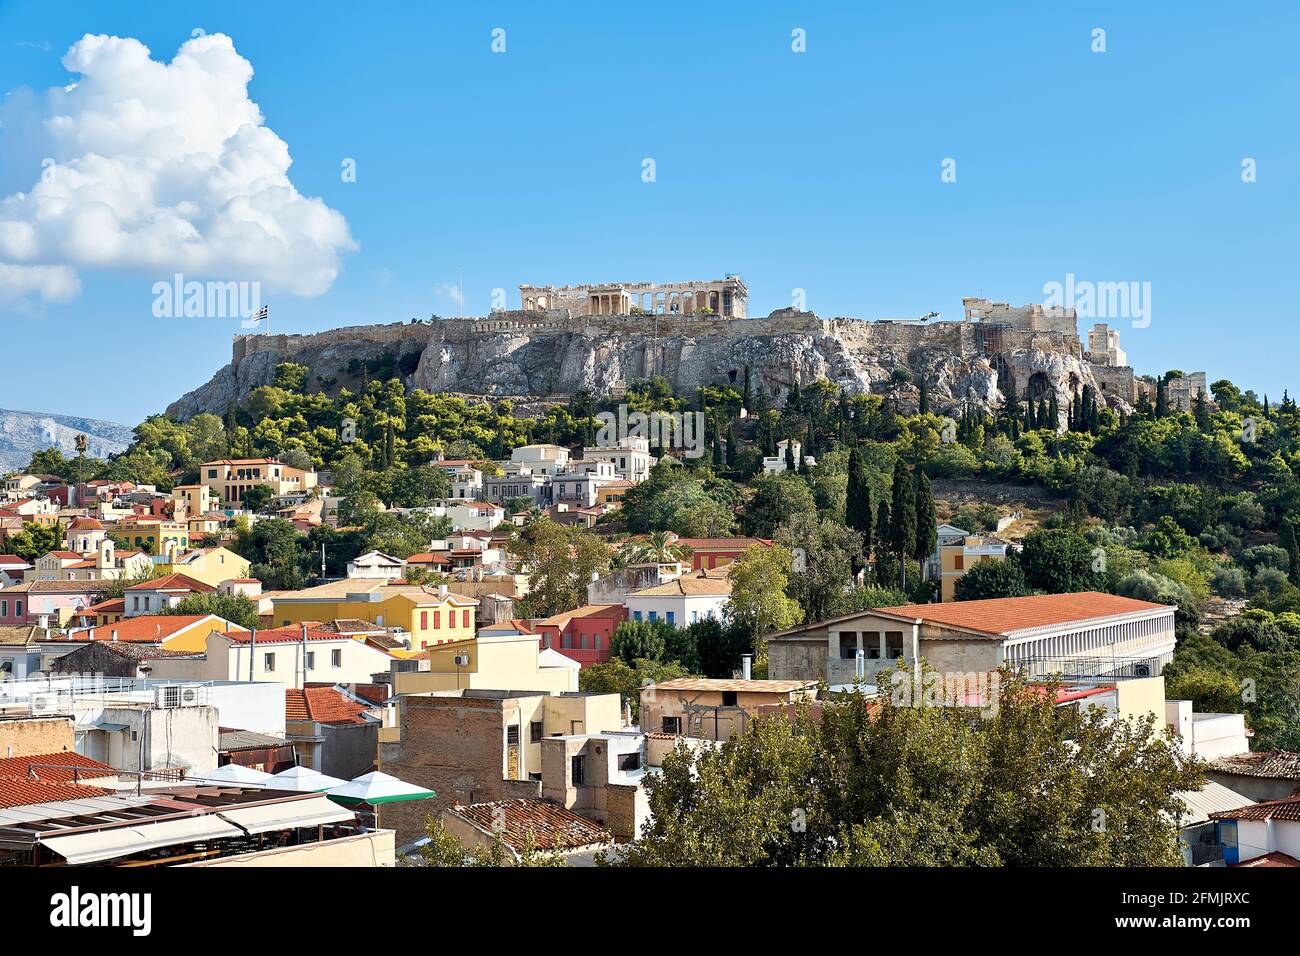 Acropolis hill with ancient temples and roofs of houses in Athens, Greece, with blue sky. Stock Photo